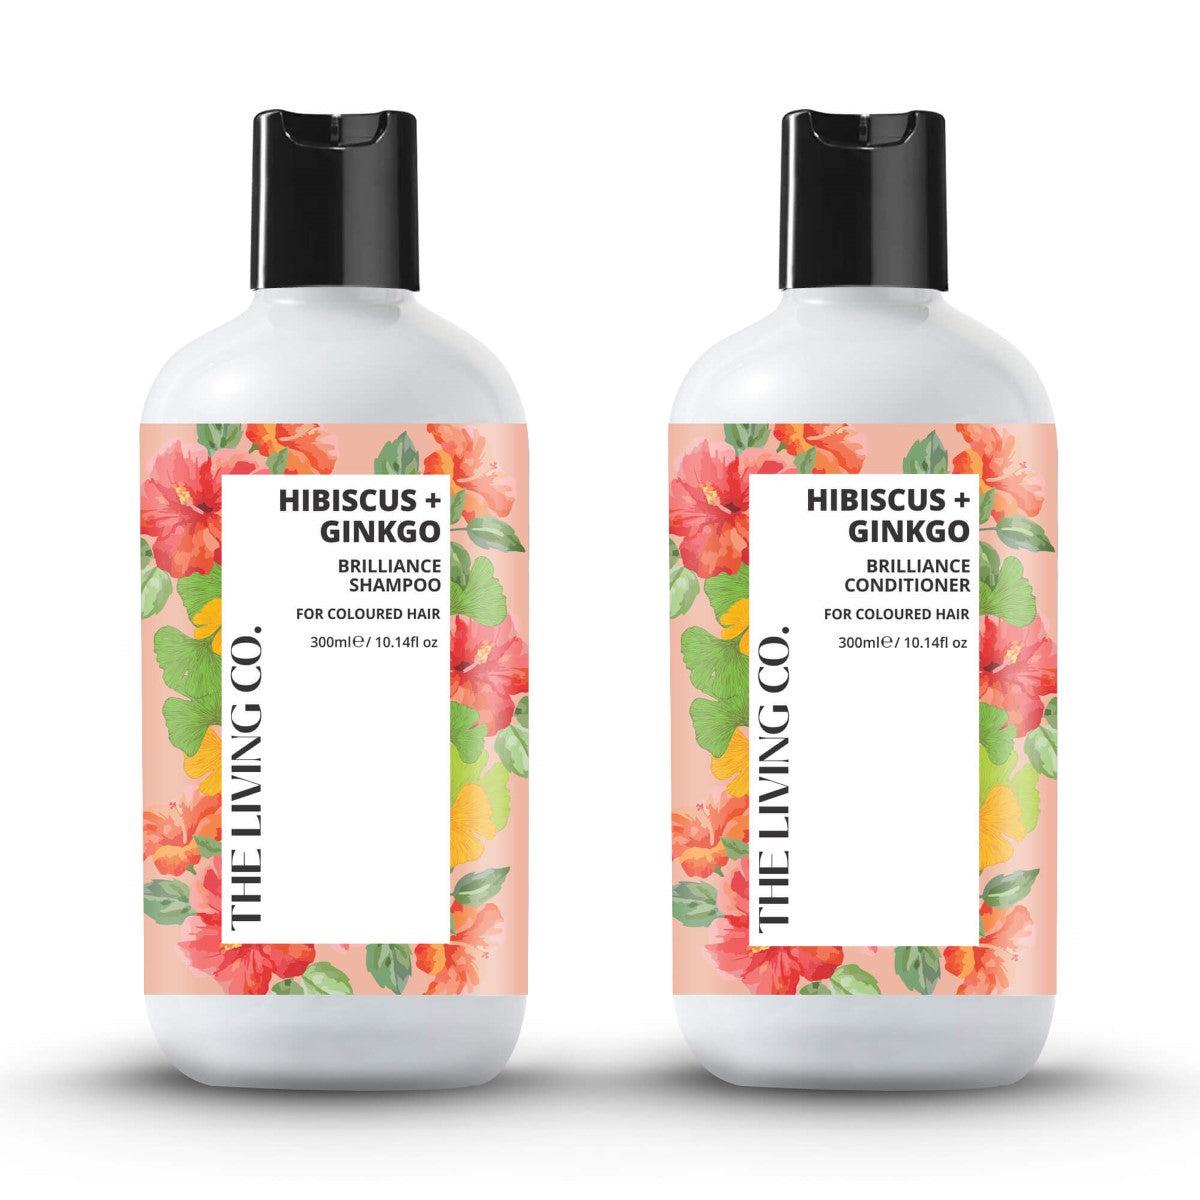 Brilliance Hair Care Combo With Hibiscus + Ginkgo